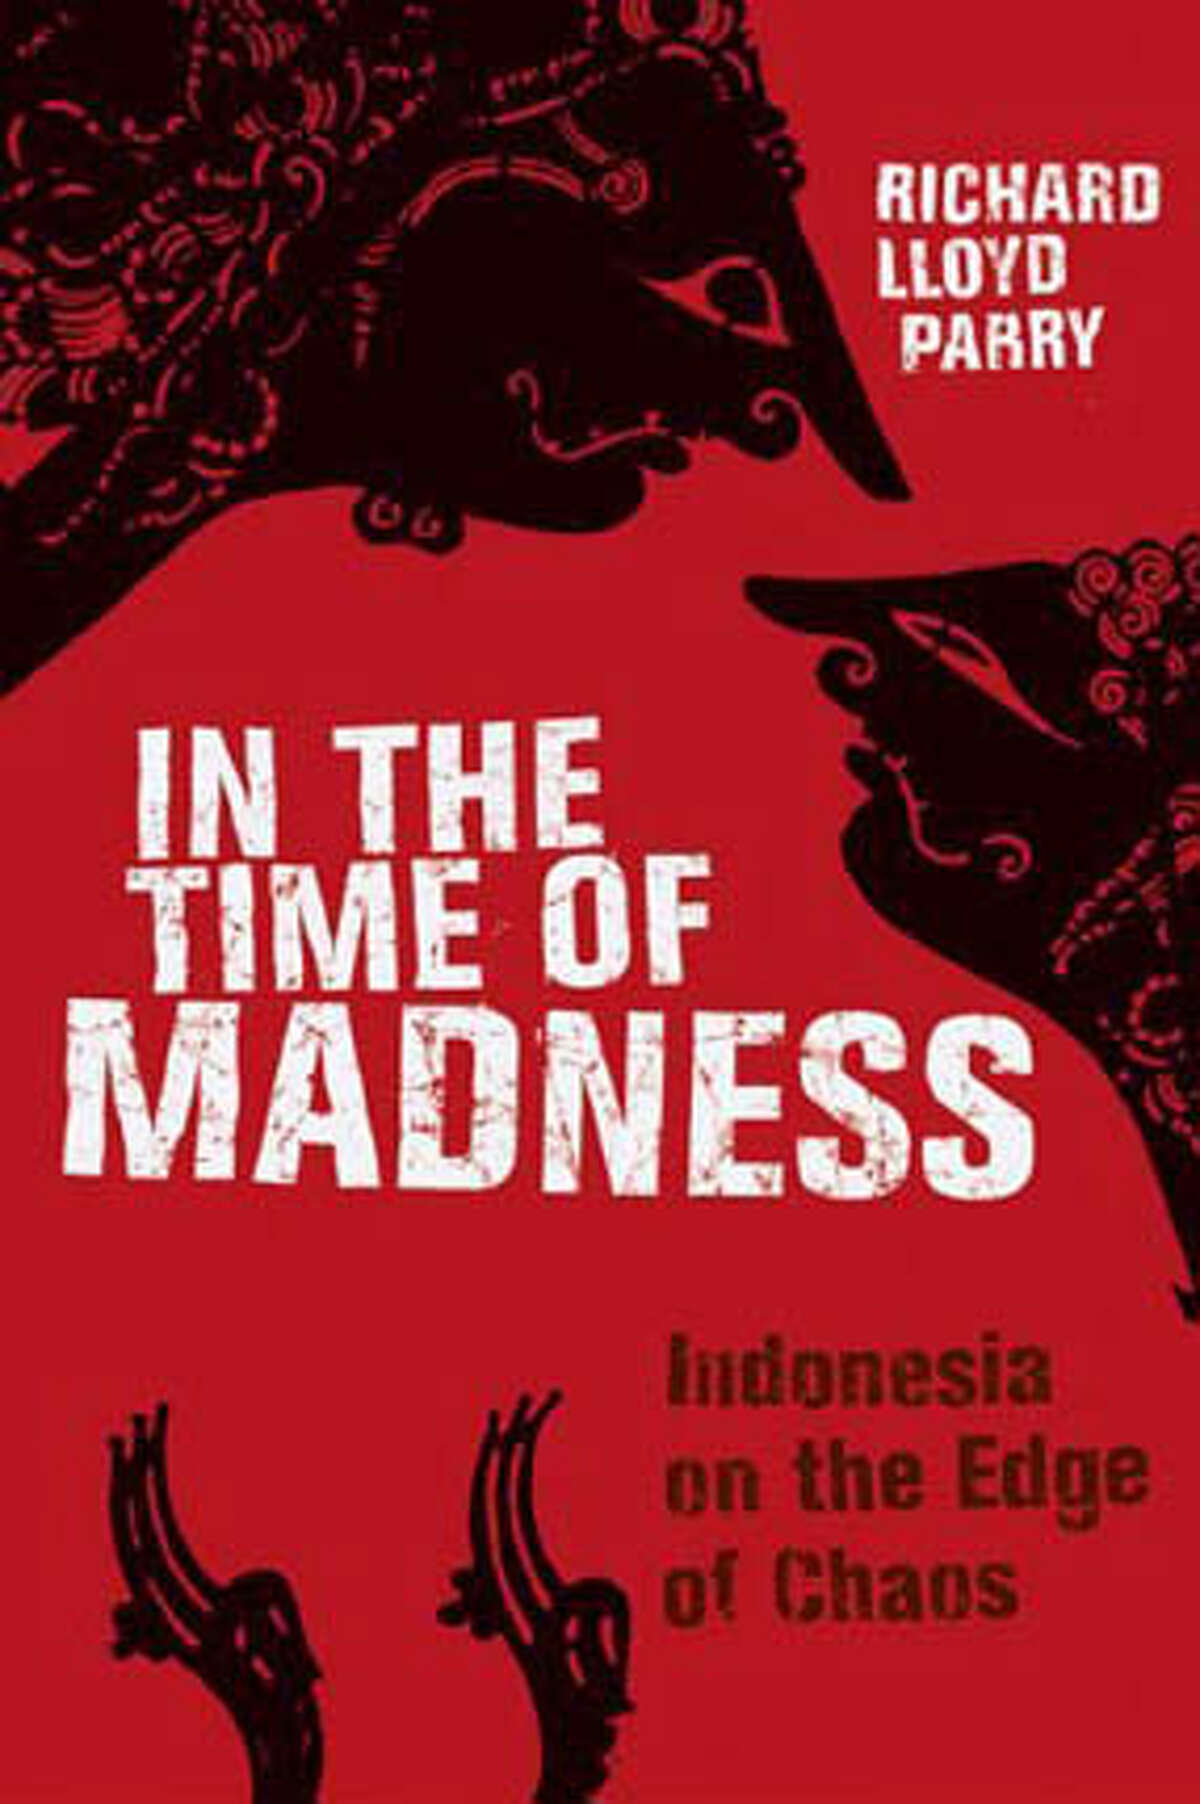 "In the Time of Madness: Indonesia on the Edge of Chaos," by Richard Lloyd Parry (Grove Press; 315 pages; $24)